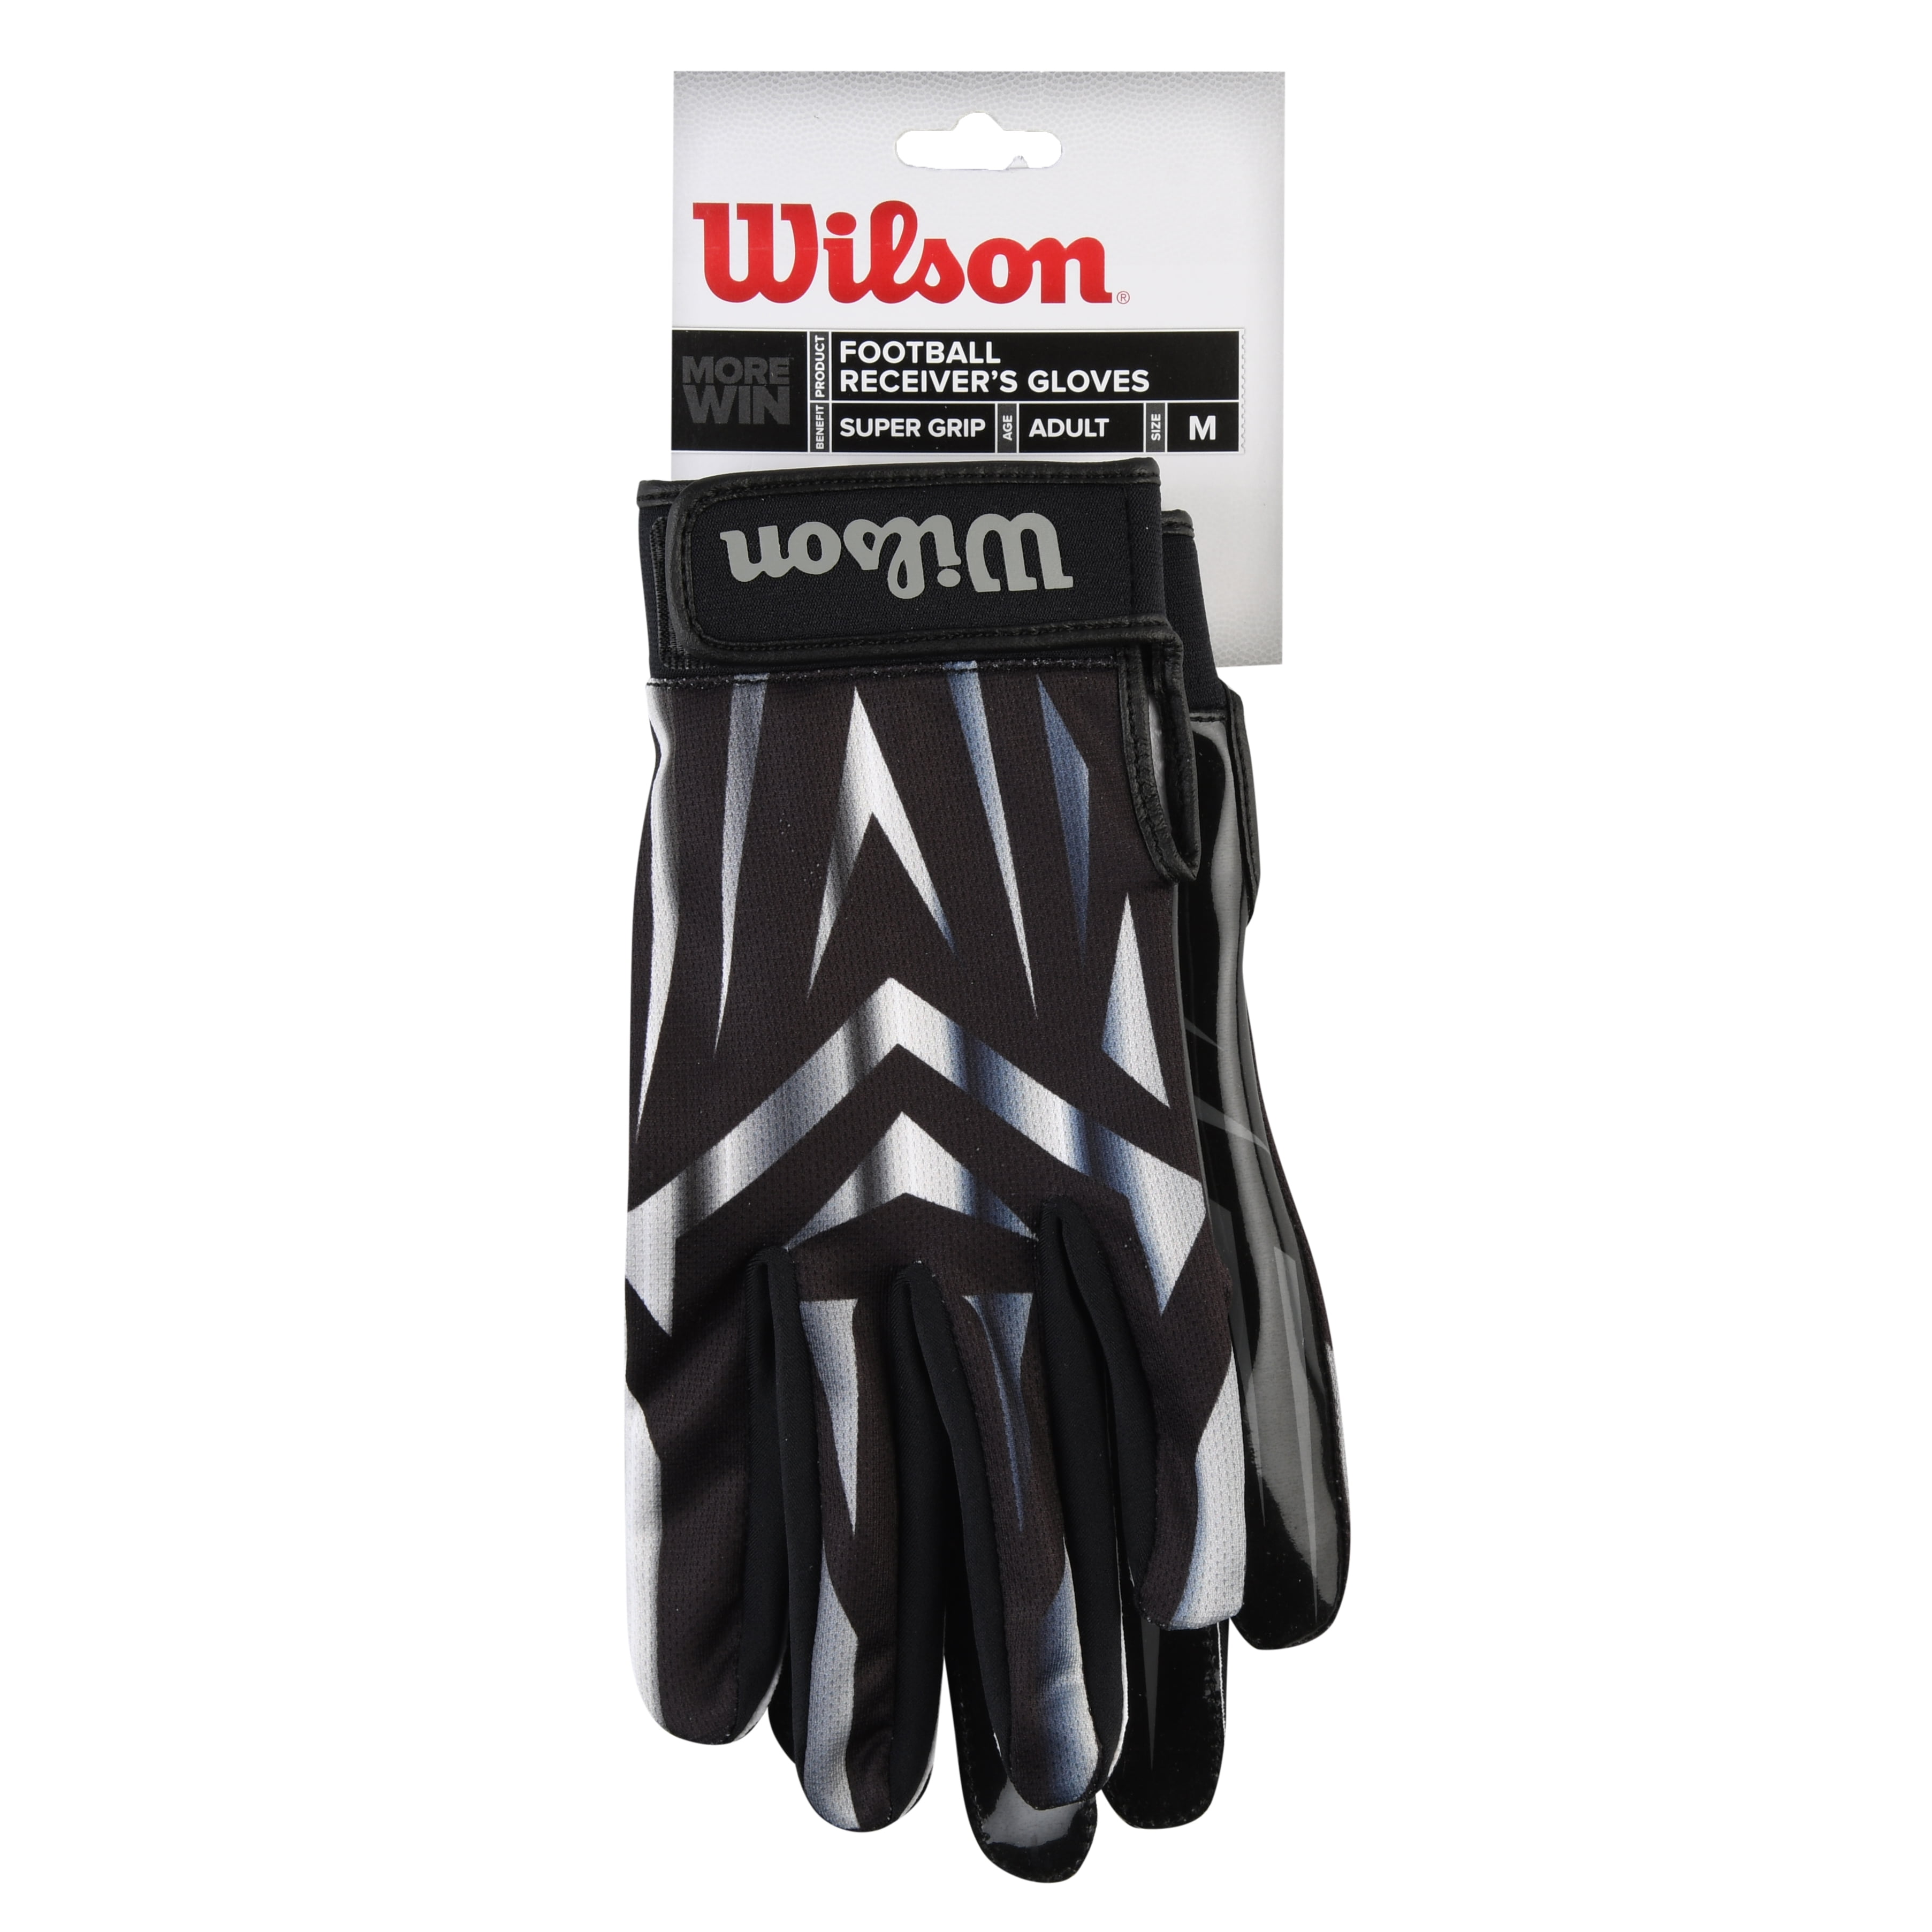 Wilson Football Receiver Gloves Super Grip Adult Large WTF9305YES for sale online 